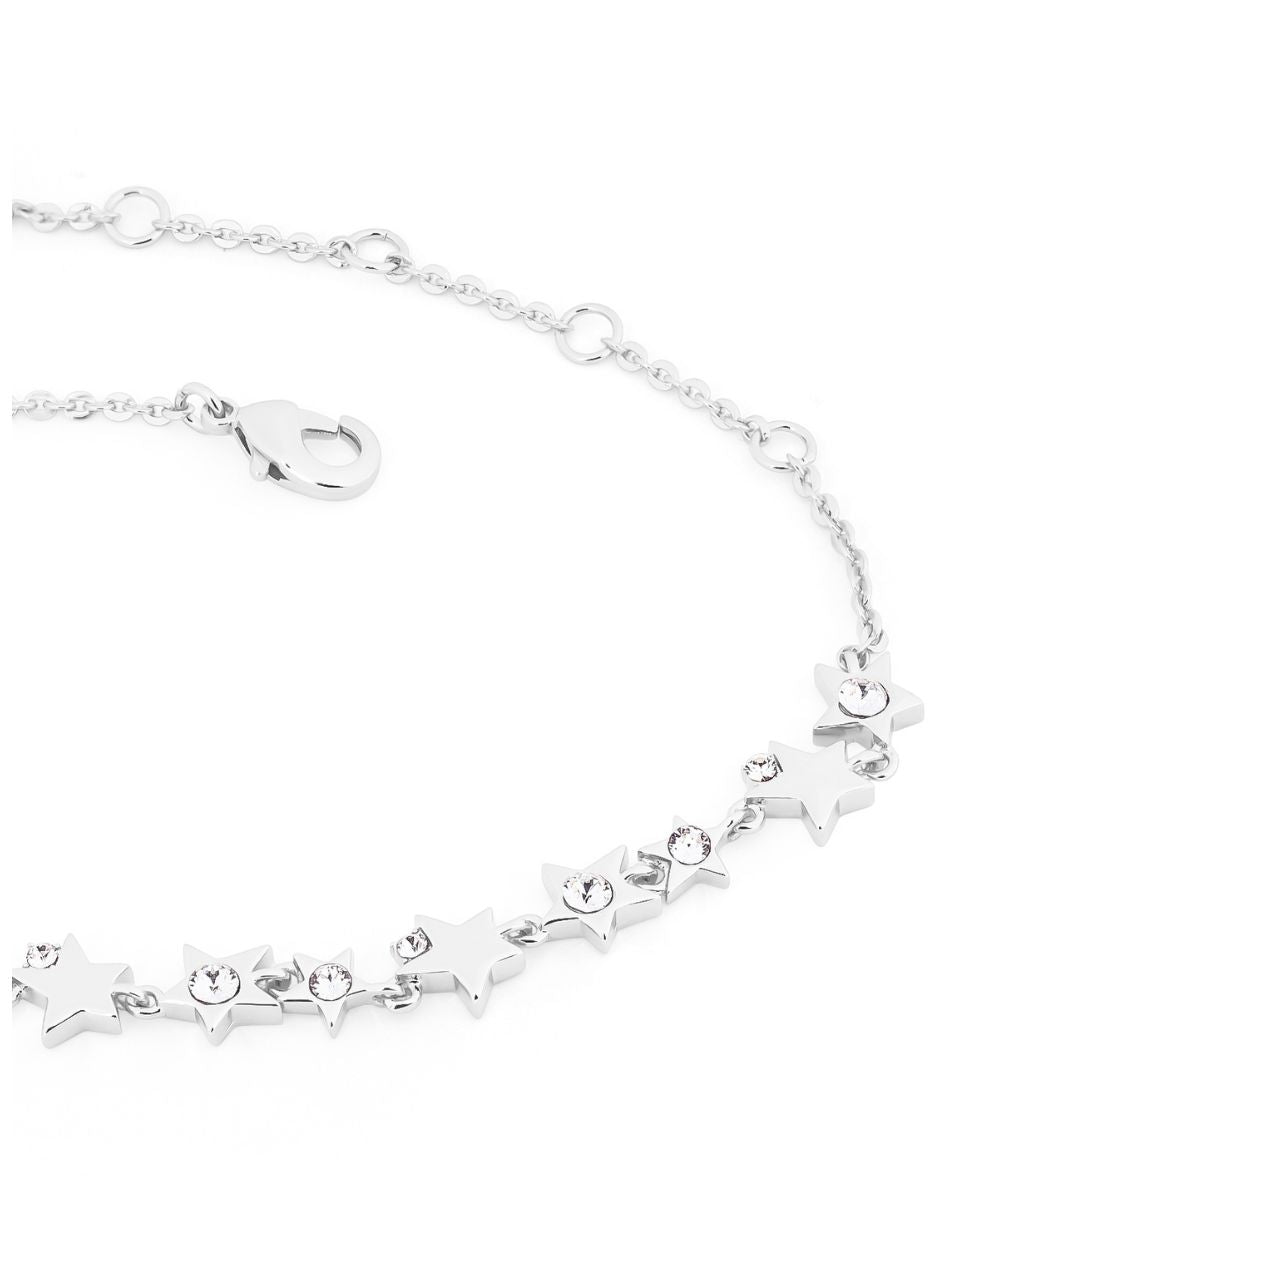 Expertly crafted by Tipperary, the Silver Shooting Star Bracelet is a must-have accessory for any fashion-forward individual. Made of silver, this bracelet features a delicate shooting star design that adds a touch of elegance to any outfit. Upgrade your style with this stunning piece.